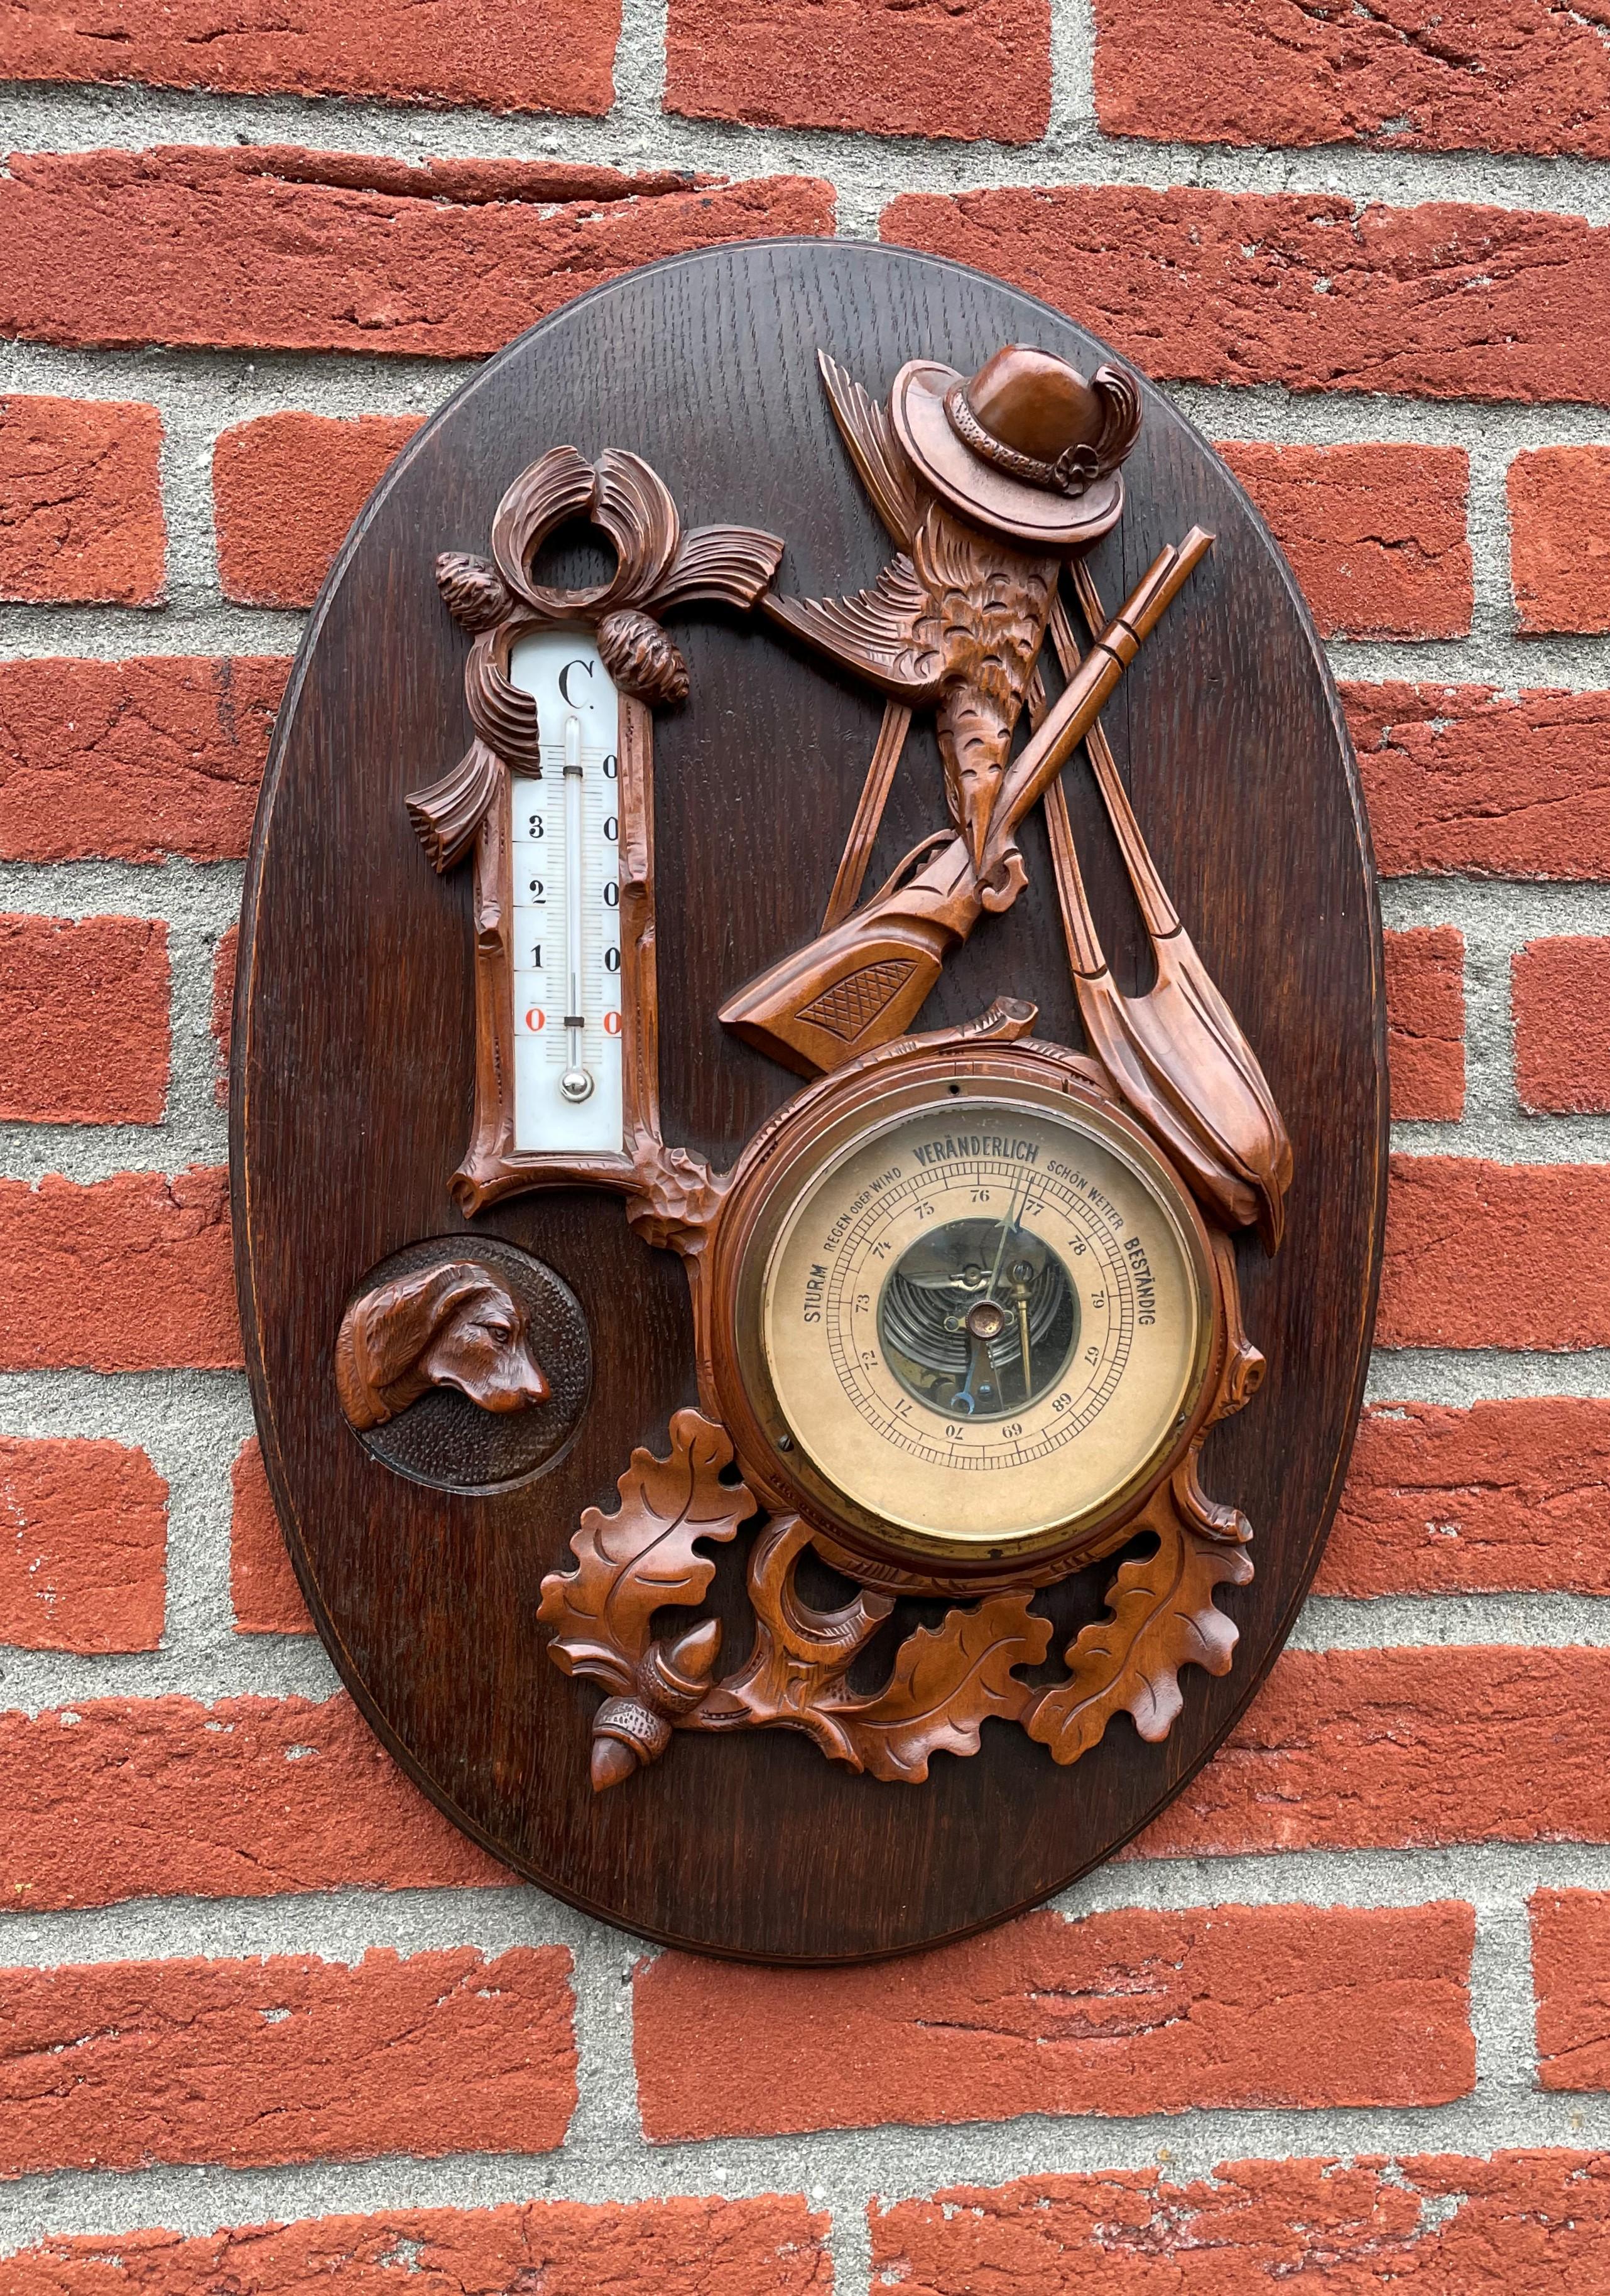 Fabulous antique Black Forest wall barometer and thermometer.

This good size and finest quality carved barometer could be the perfect Black Forest antique to grace your home or lodge. The details in all of the hunting related sculptures reveal the